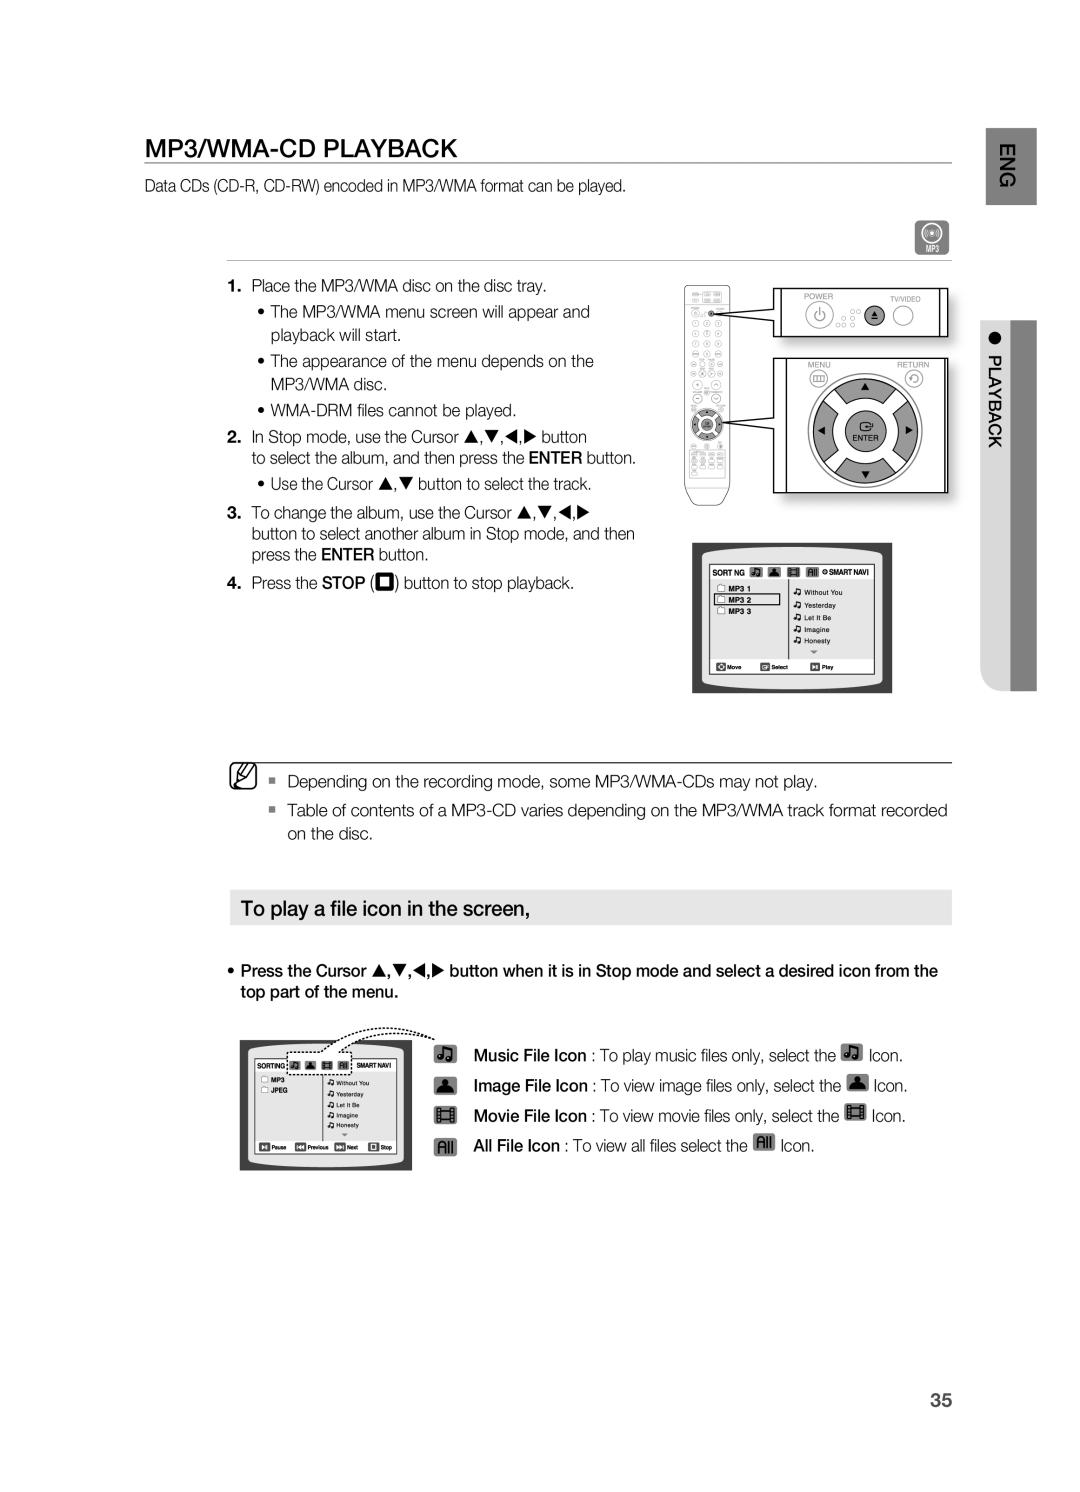 Samsung HT-TZ312 manual mP3/Wma-CDPLayBaCK, to play a file icon in the screen 